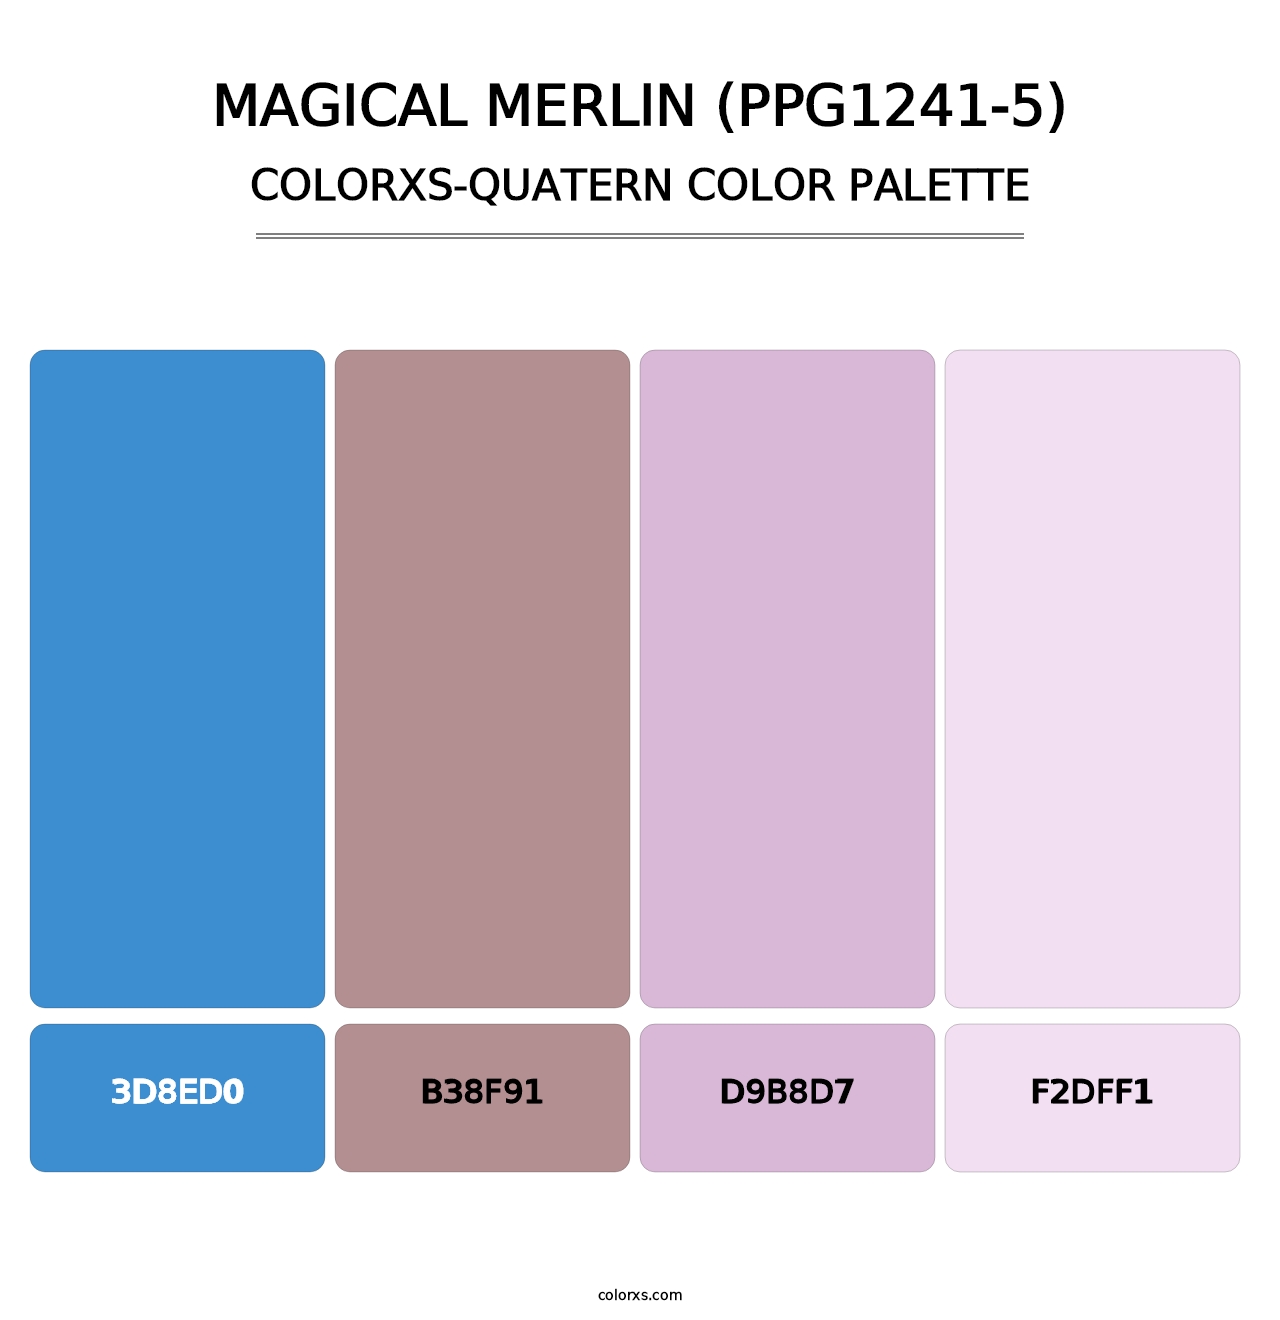 Magical Merlin (PPG1241-5) - Colorxs Quatern Palette